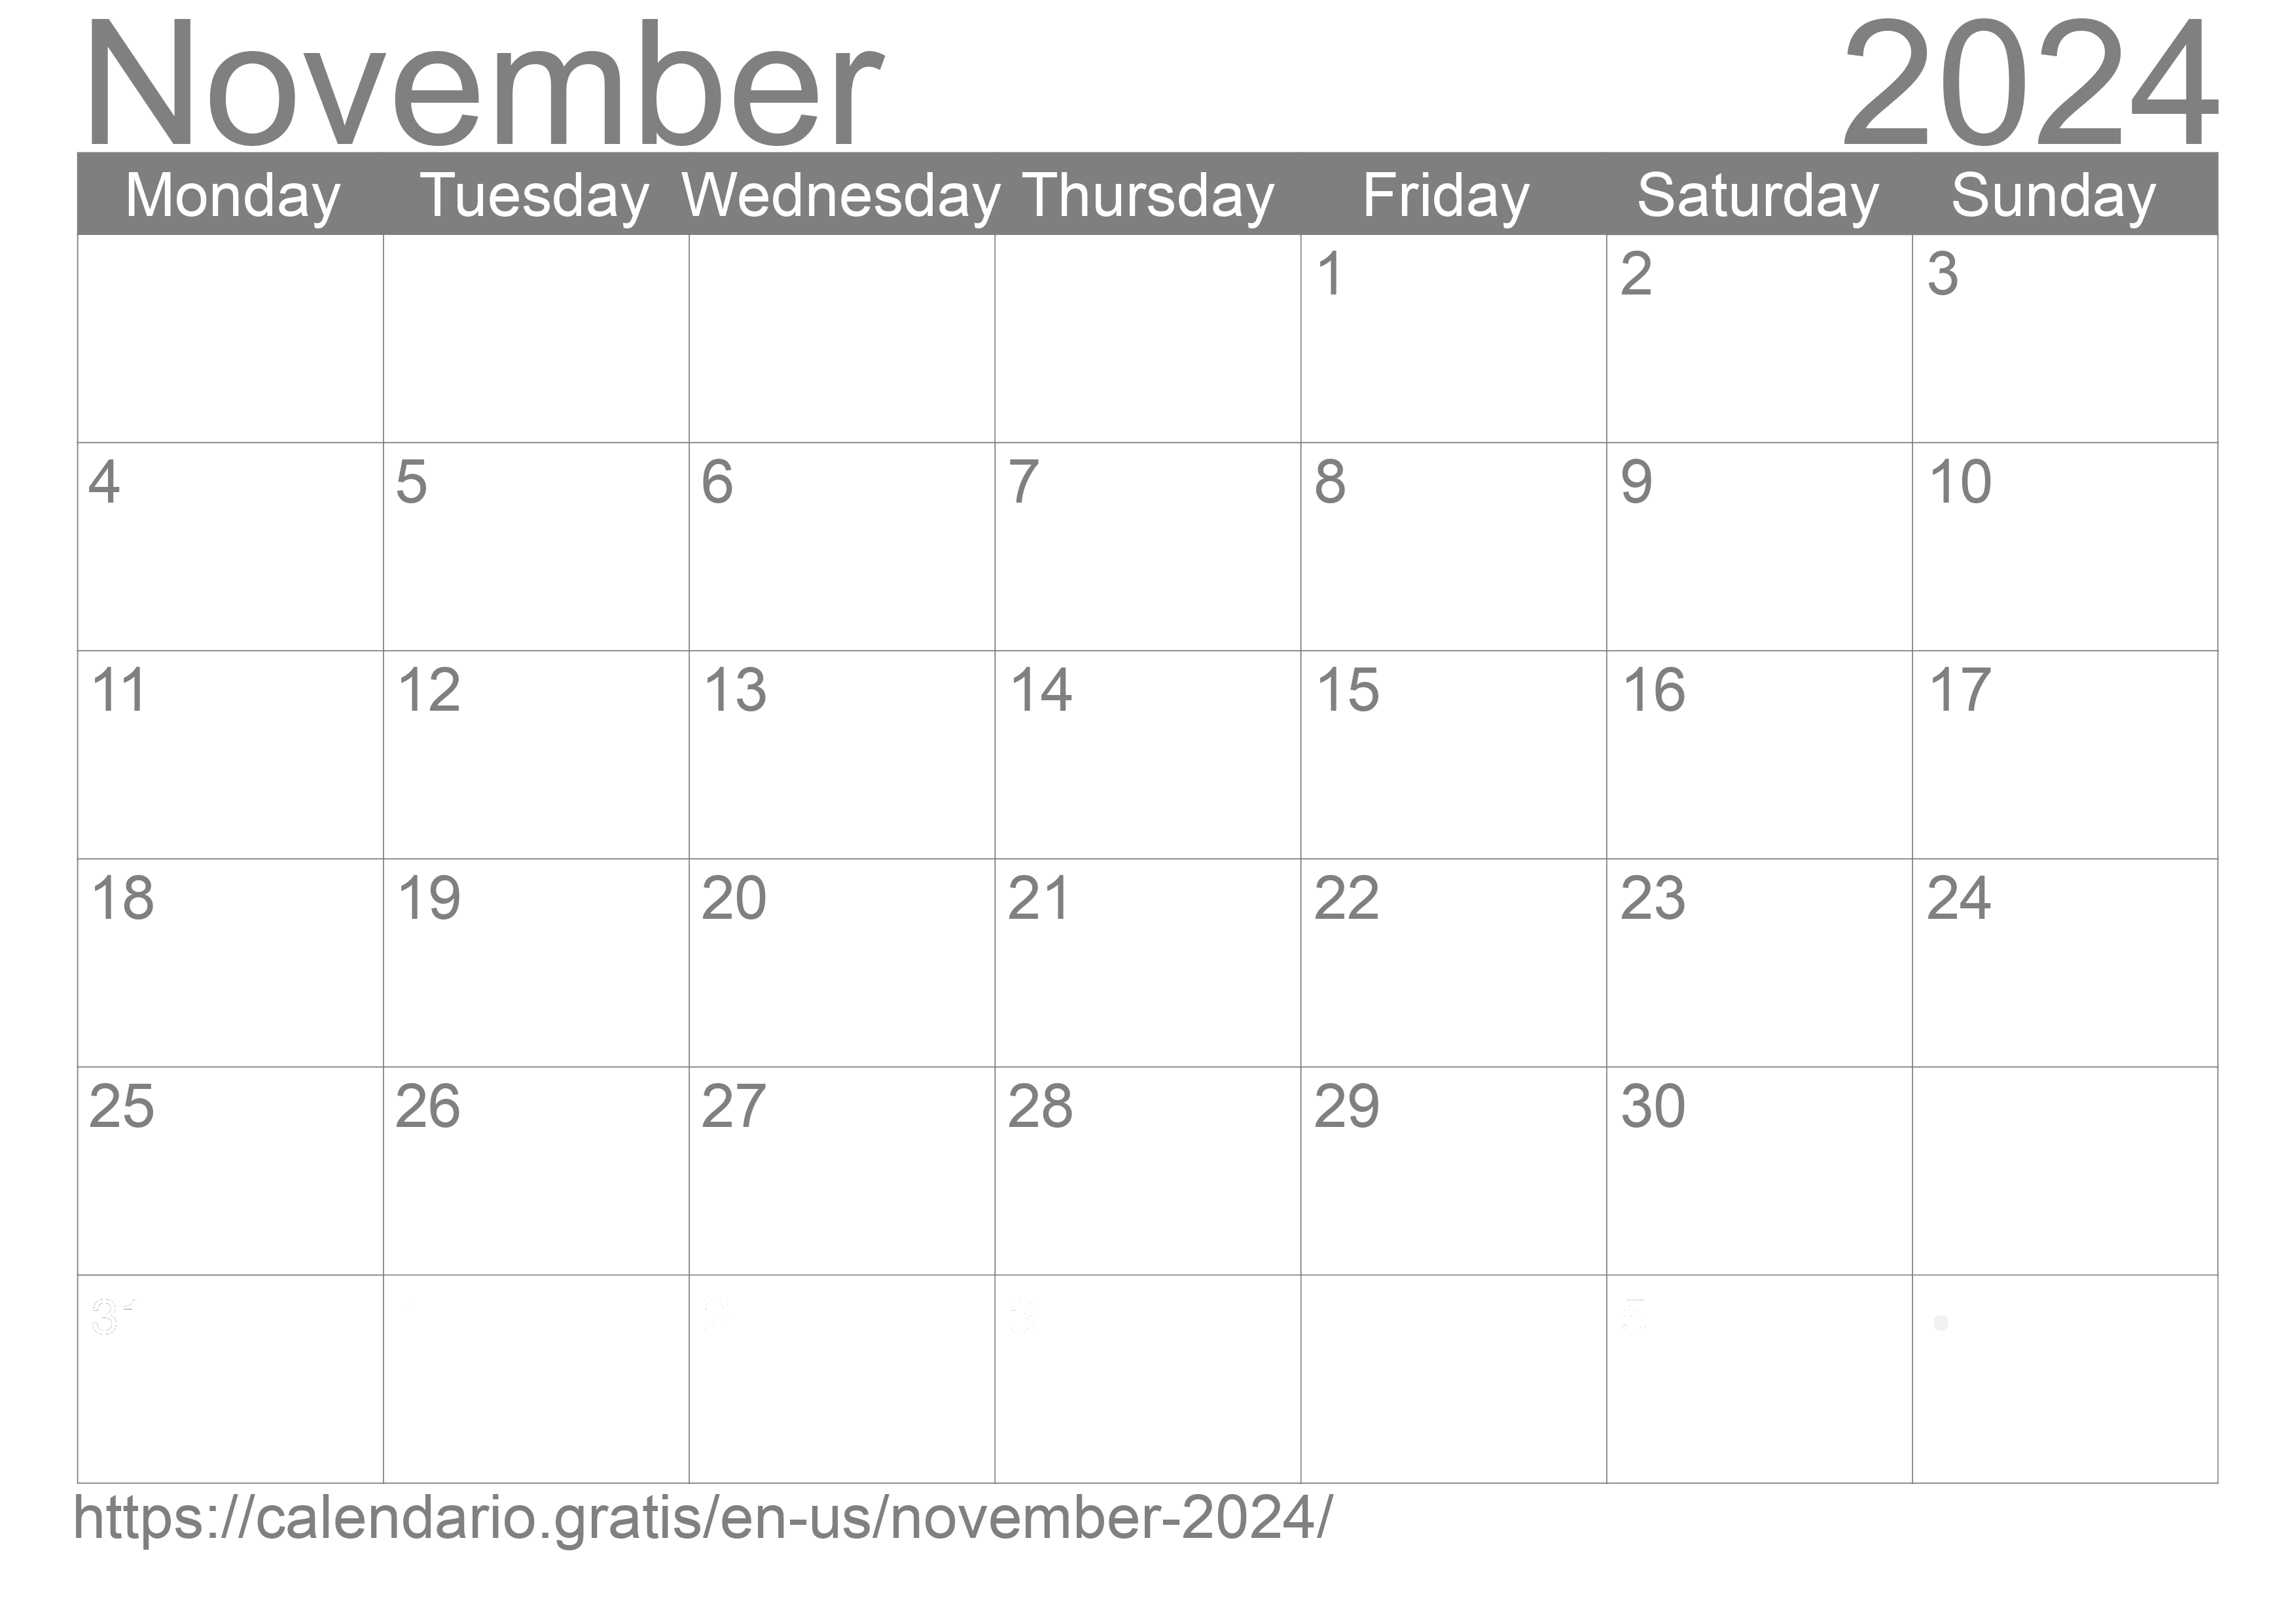 Calendar November 2024 from United States of America in English ☑️